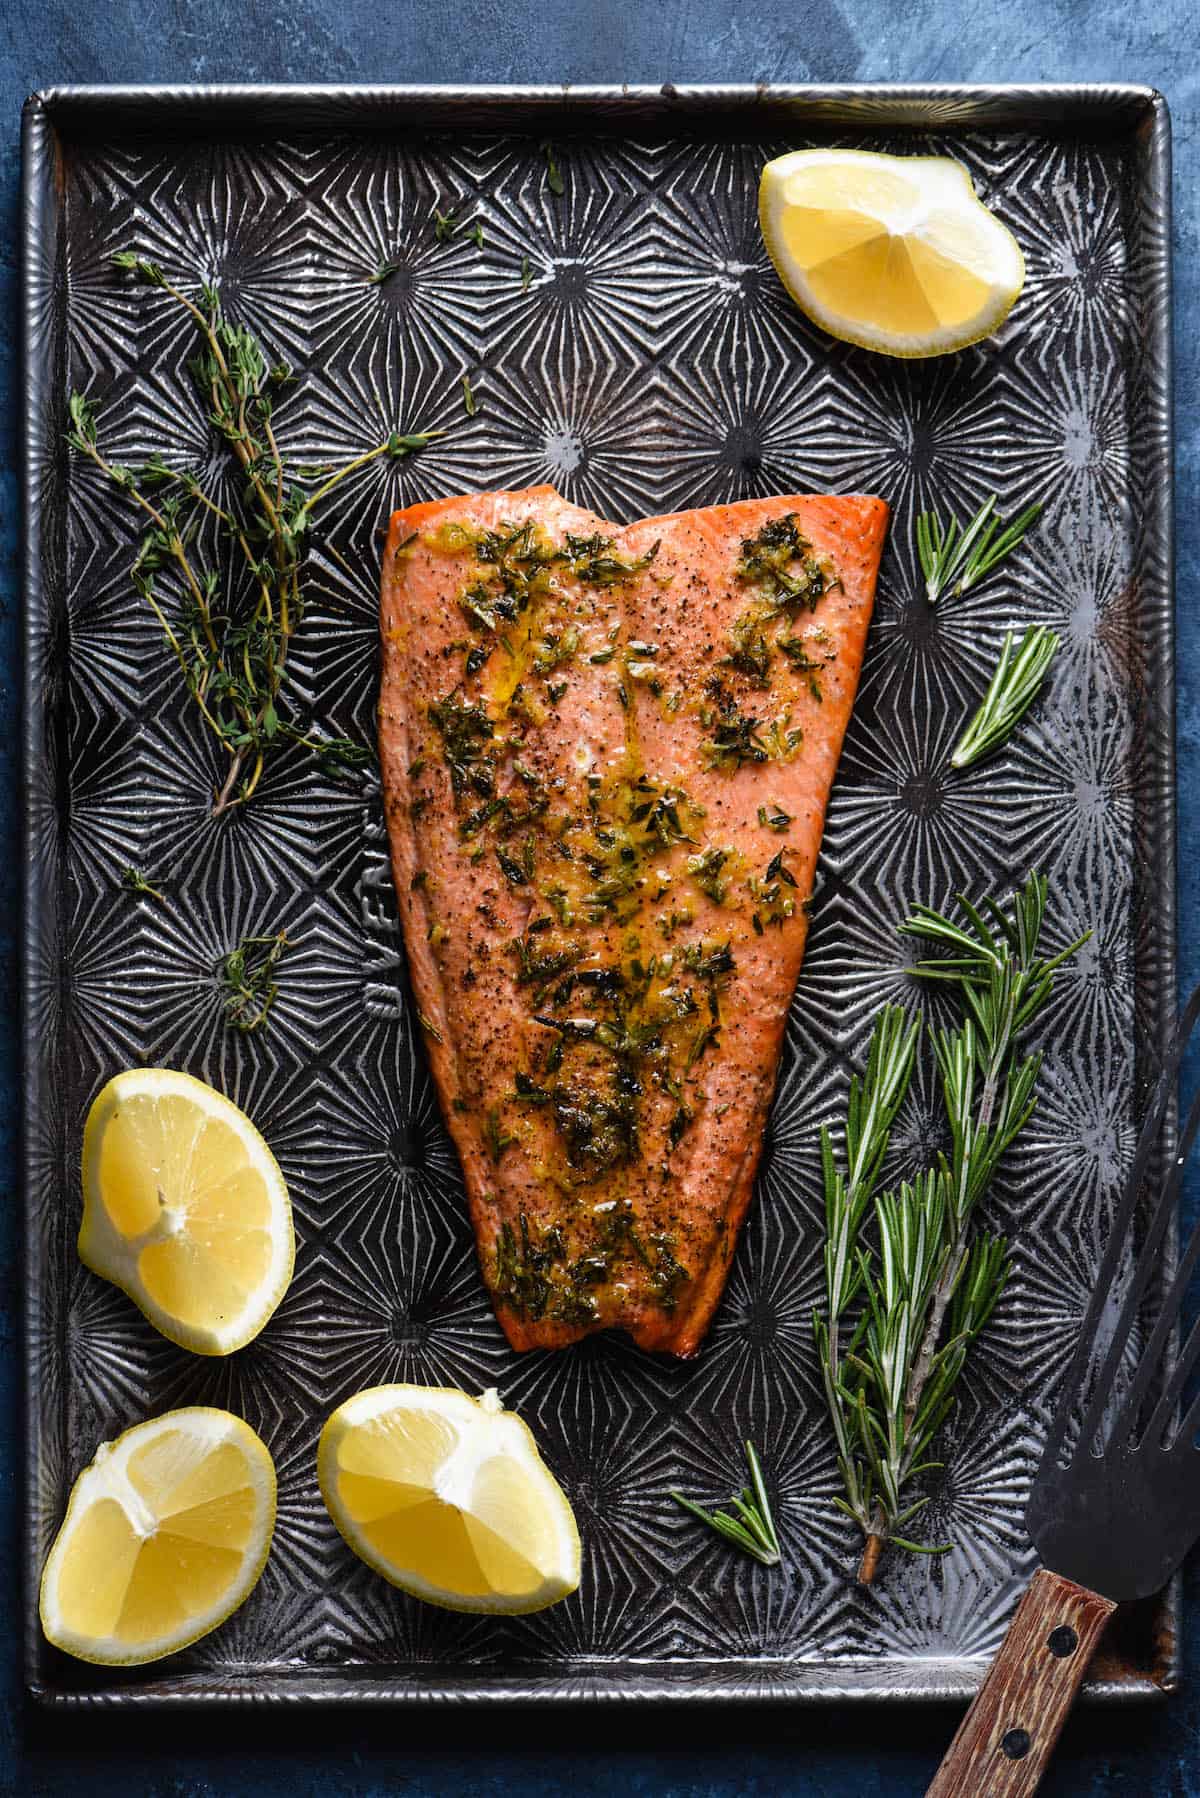 A fillet of pink hued fish on top of star printed baking sheet. Lemon wedges and fresh herbs garnish the scene.